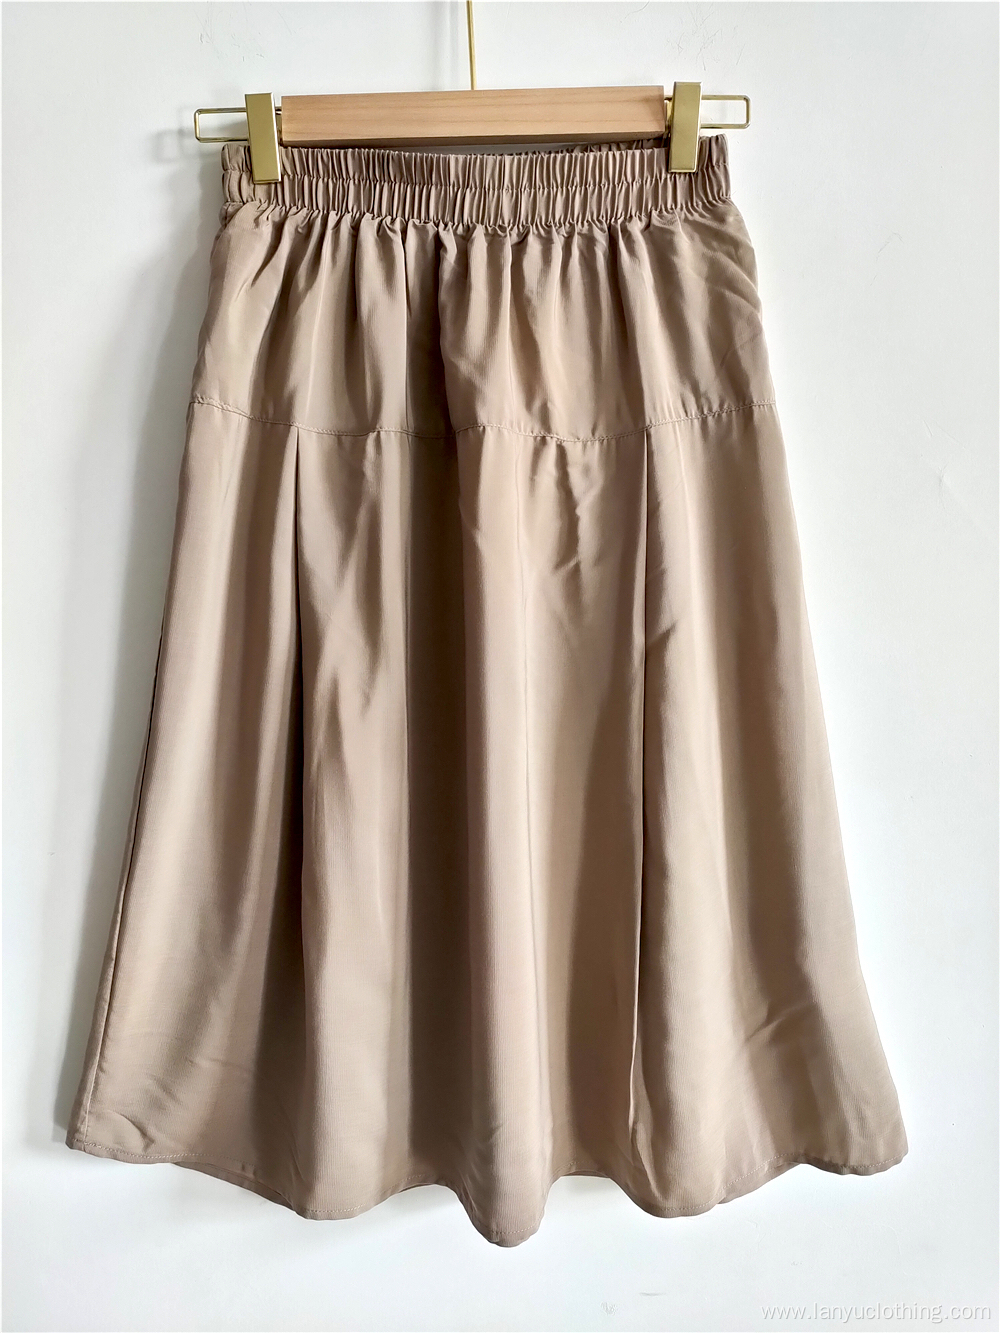 Ladies' Casual Beige Skirt For Spring